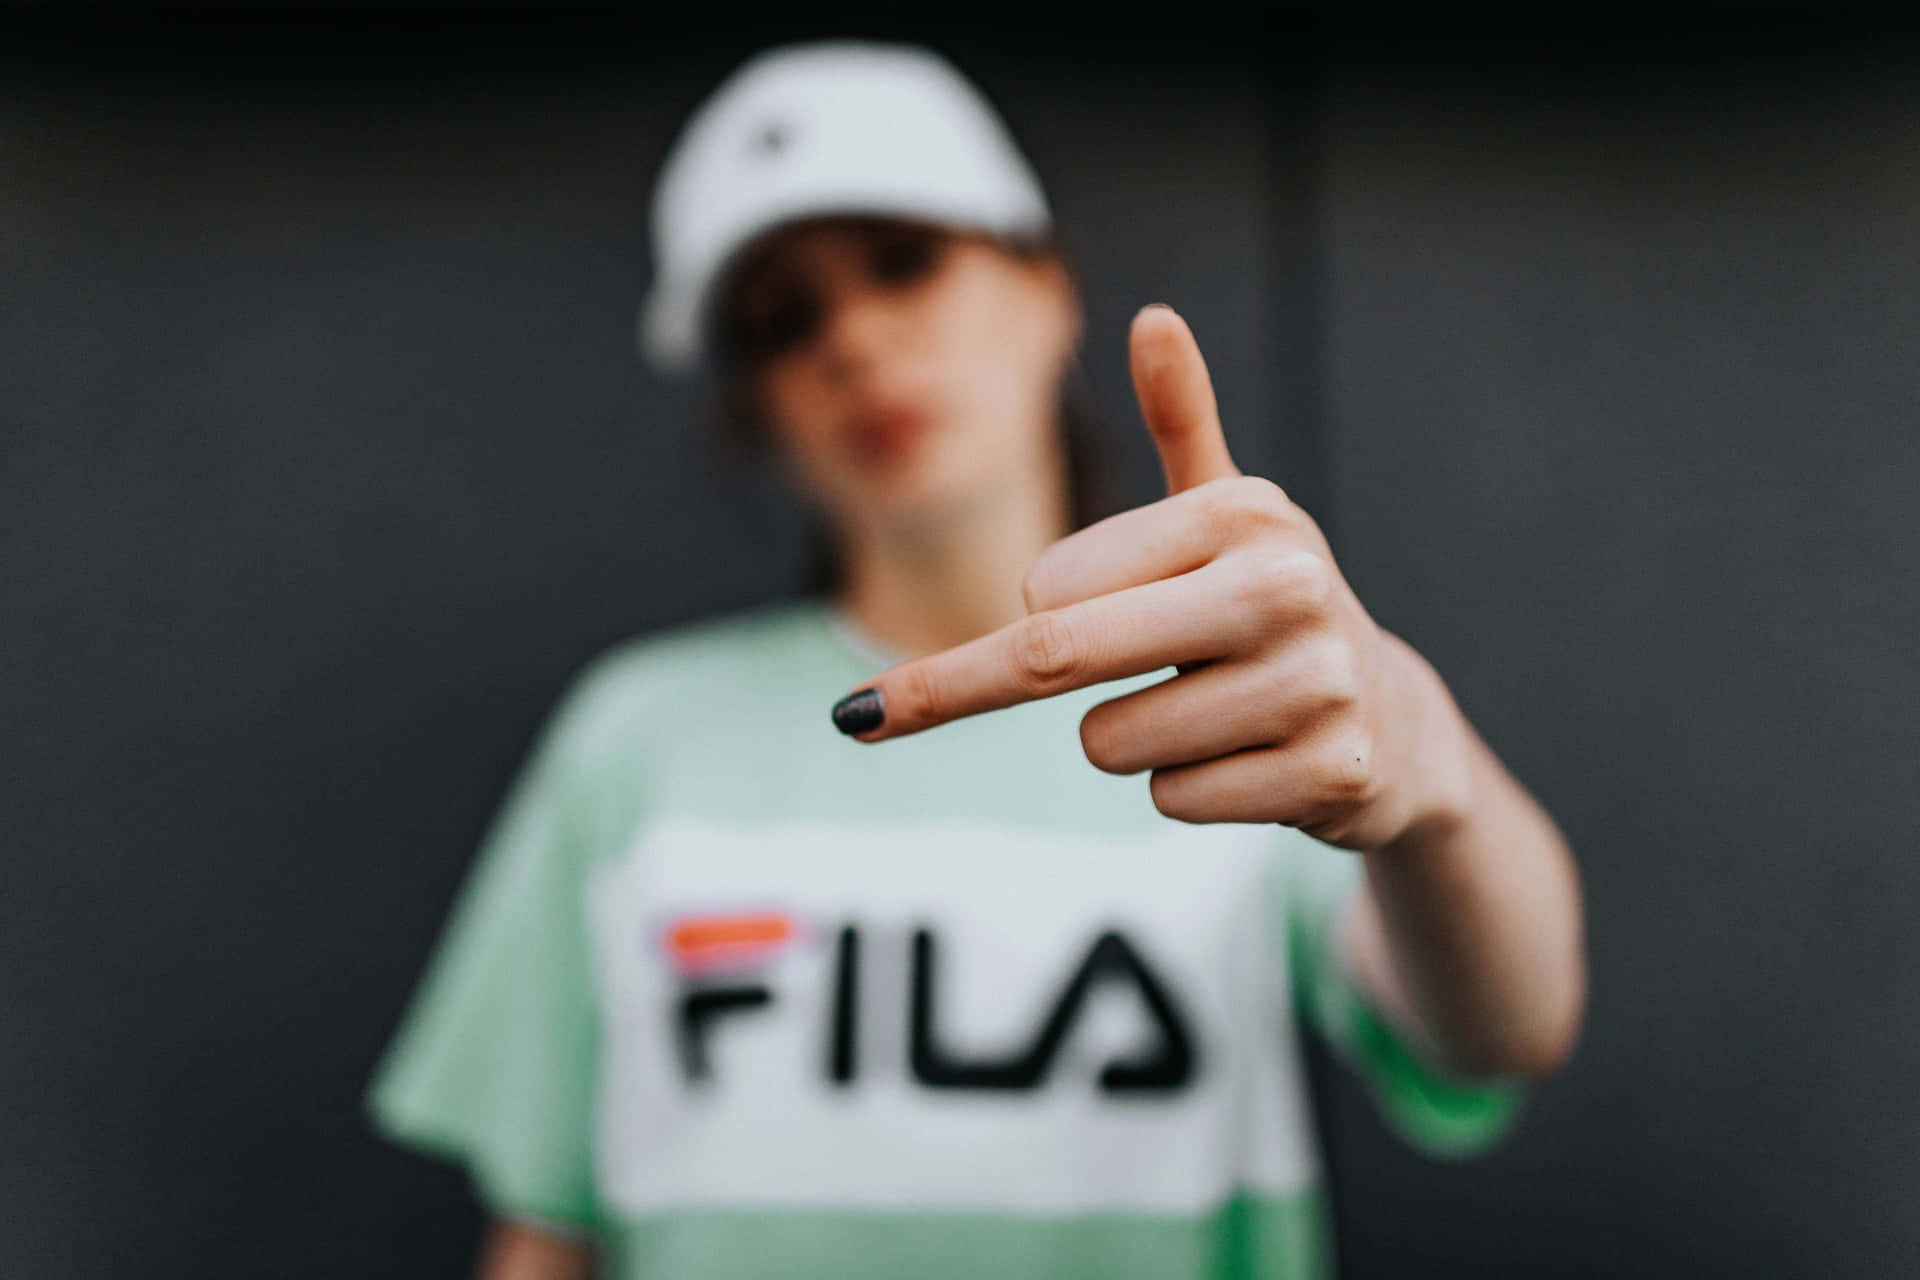 Fila T-shirt - A Woman Showing The Thumbs Up